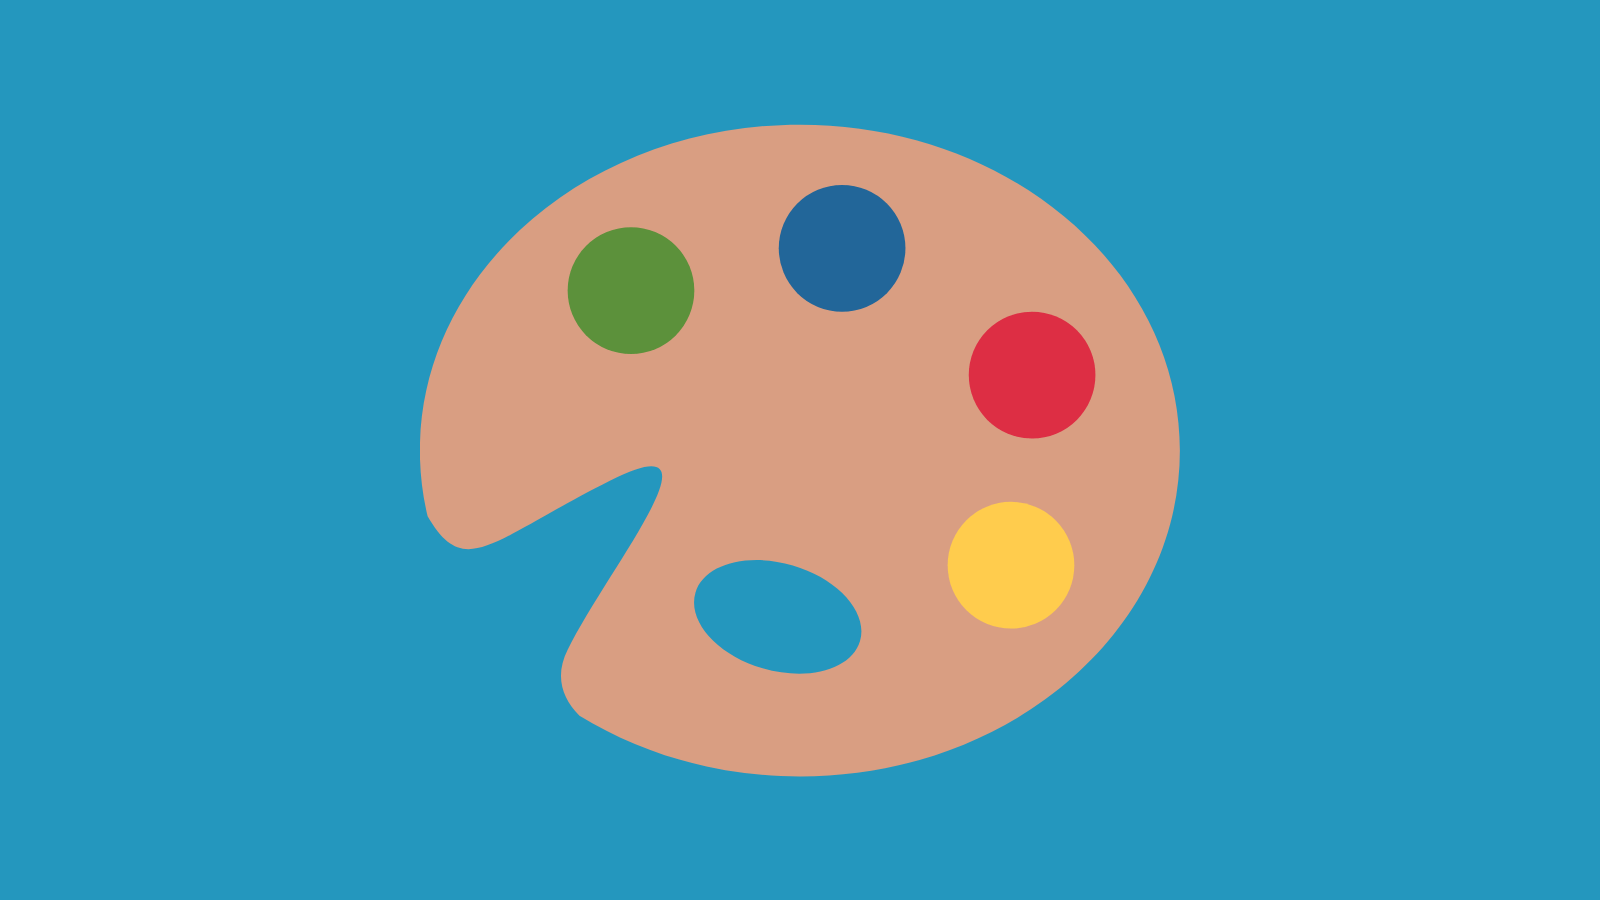 A graphic of a painter's palette